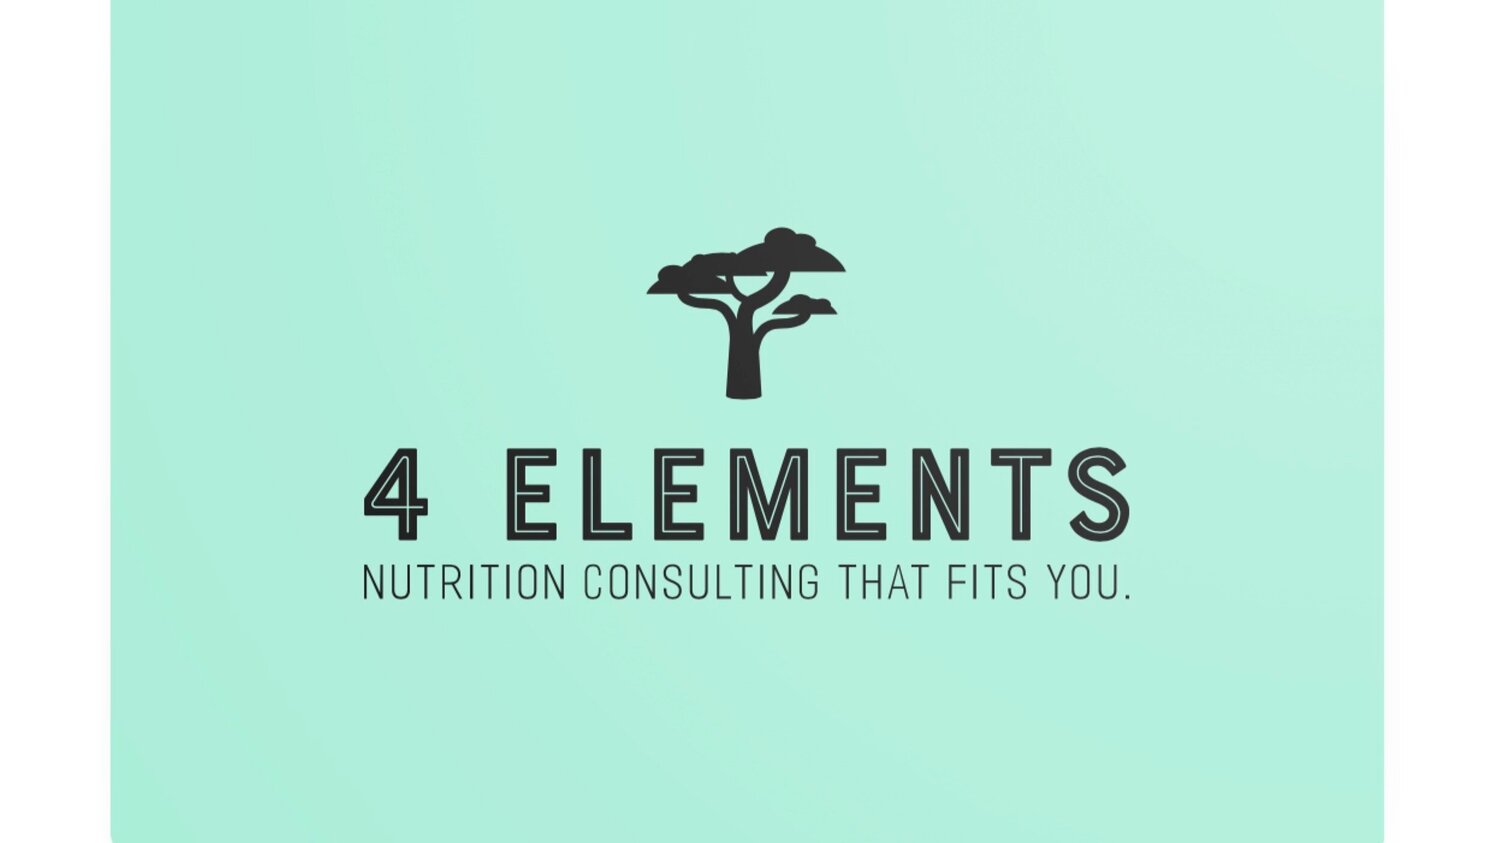 4 Elements Nutrition Consulting